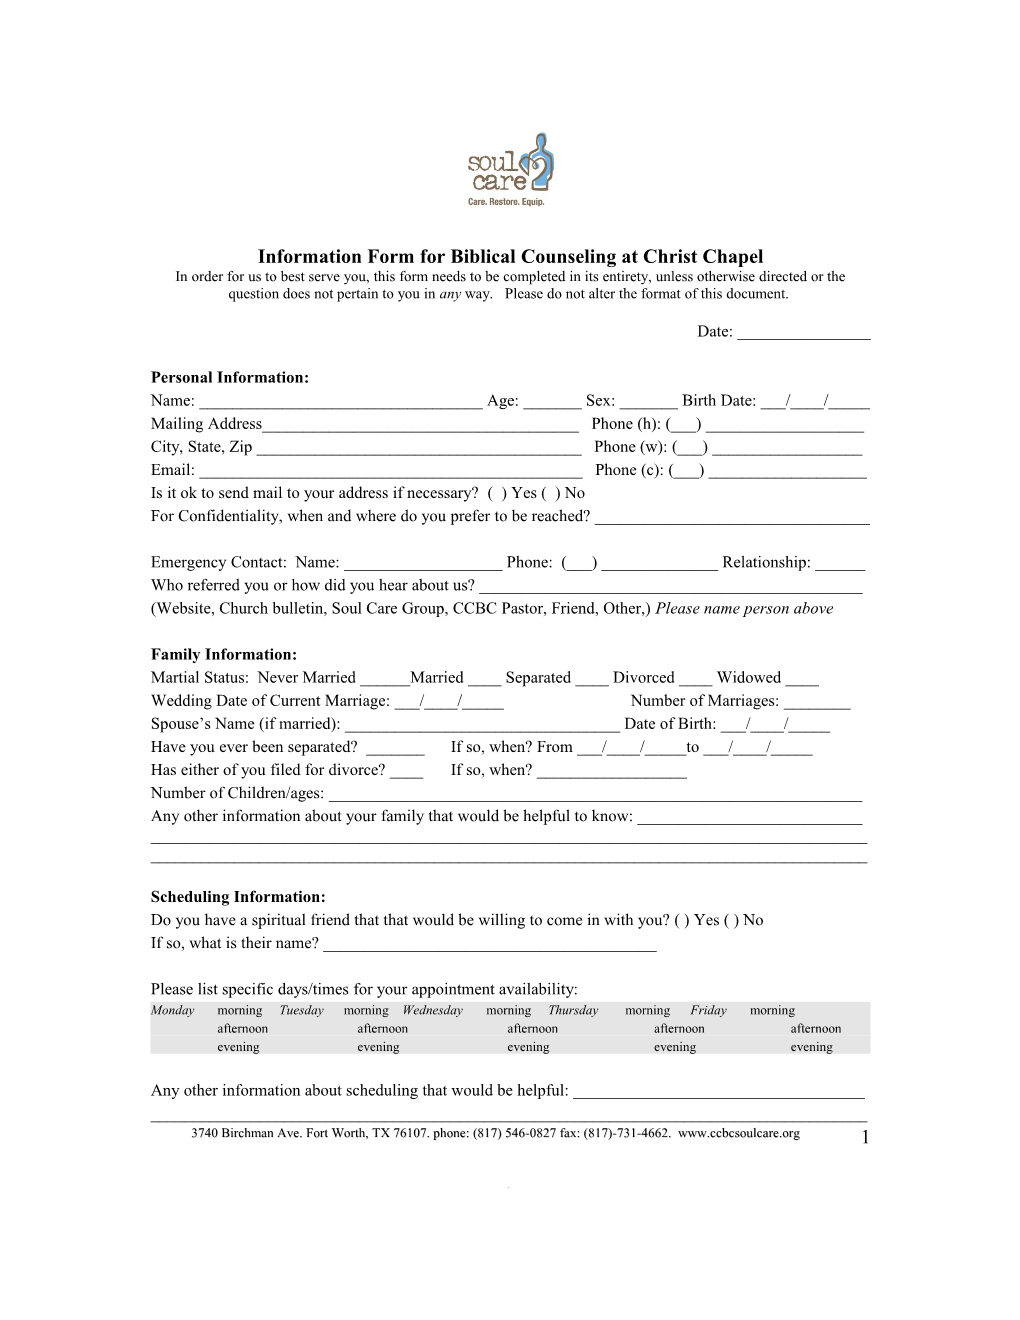 Information Form for Biblical Counseling at Christ Chapel